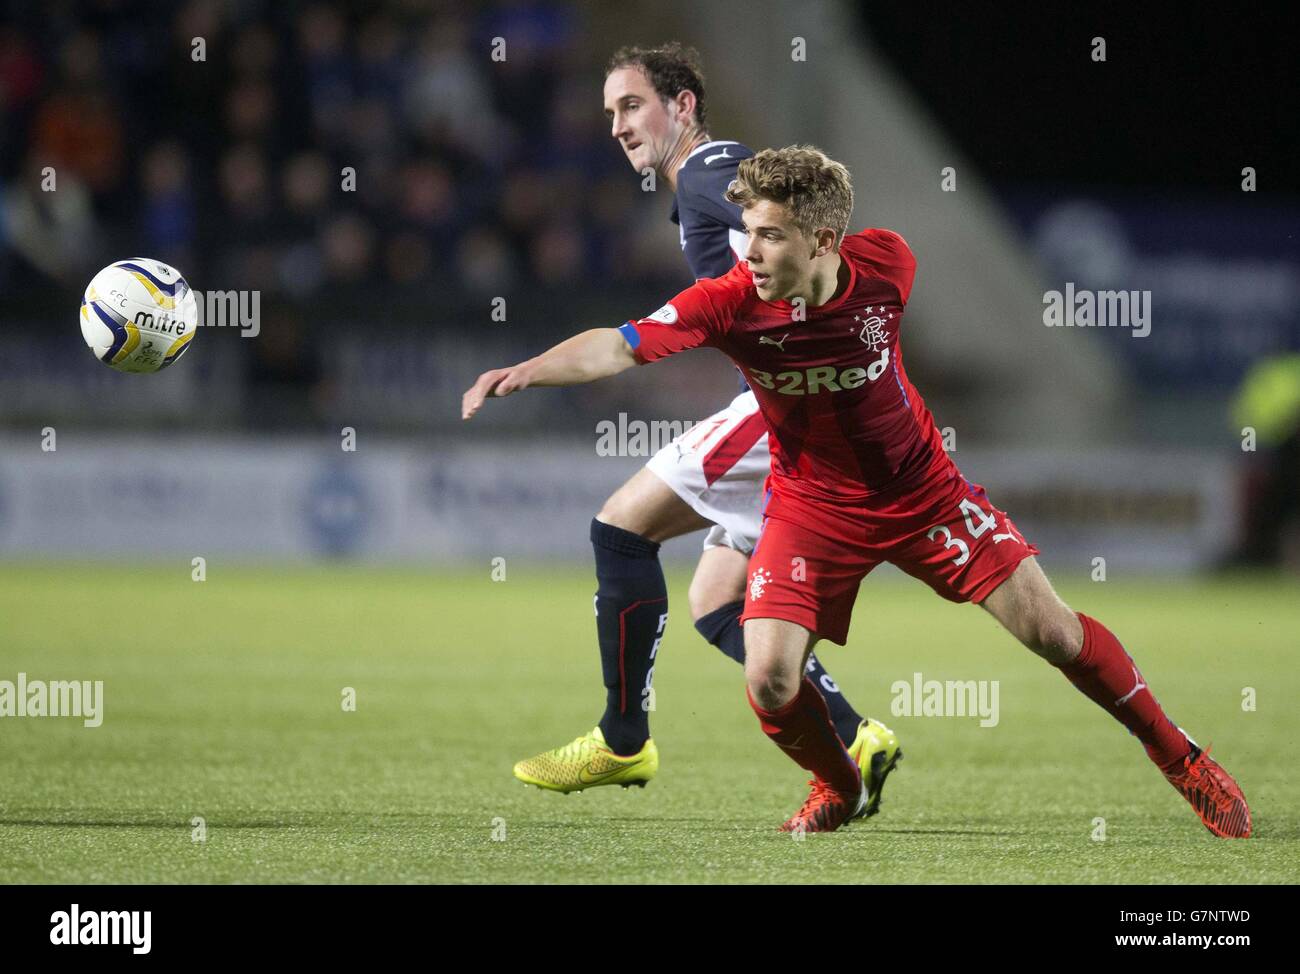 Rangers' Andrew Murdoch and Falkirk's Mark Kerr battle for the ball during the Scottish Championship match at Falkirk Stadium, Falkirk. Stock Photo